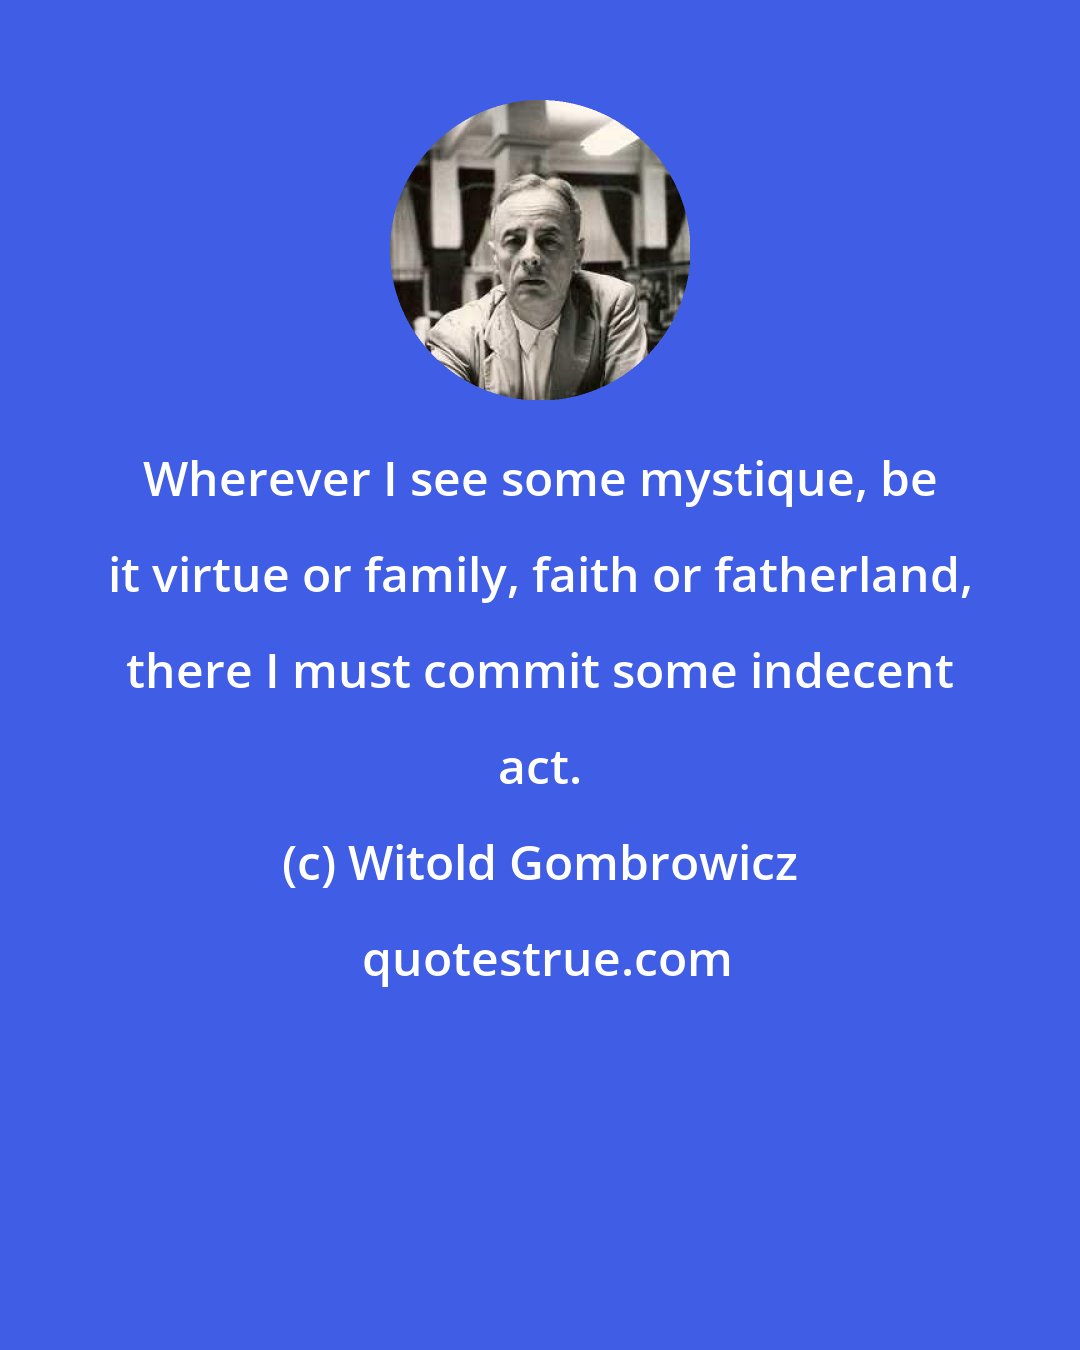 Witold Gombrowicz: Wherever I see some mystique, be it virtue or family, faith or fatherland, there I must commit some indecent act.